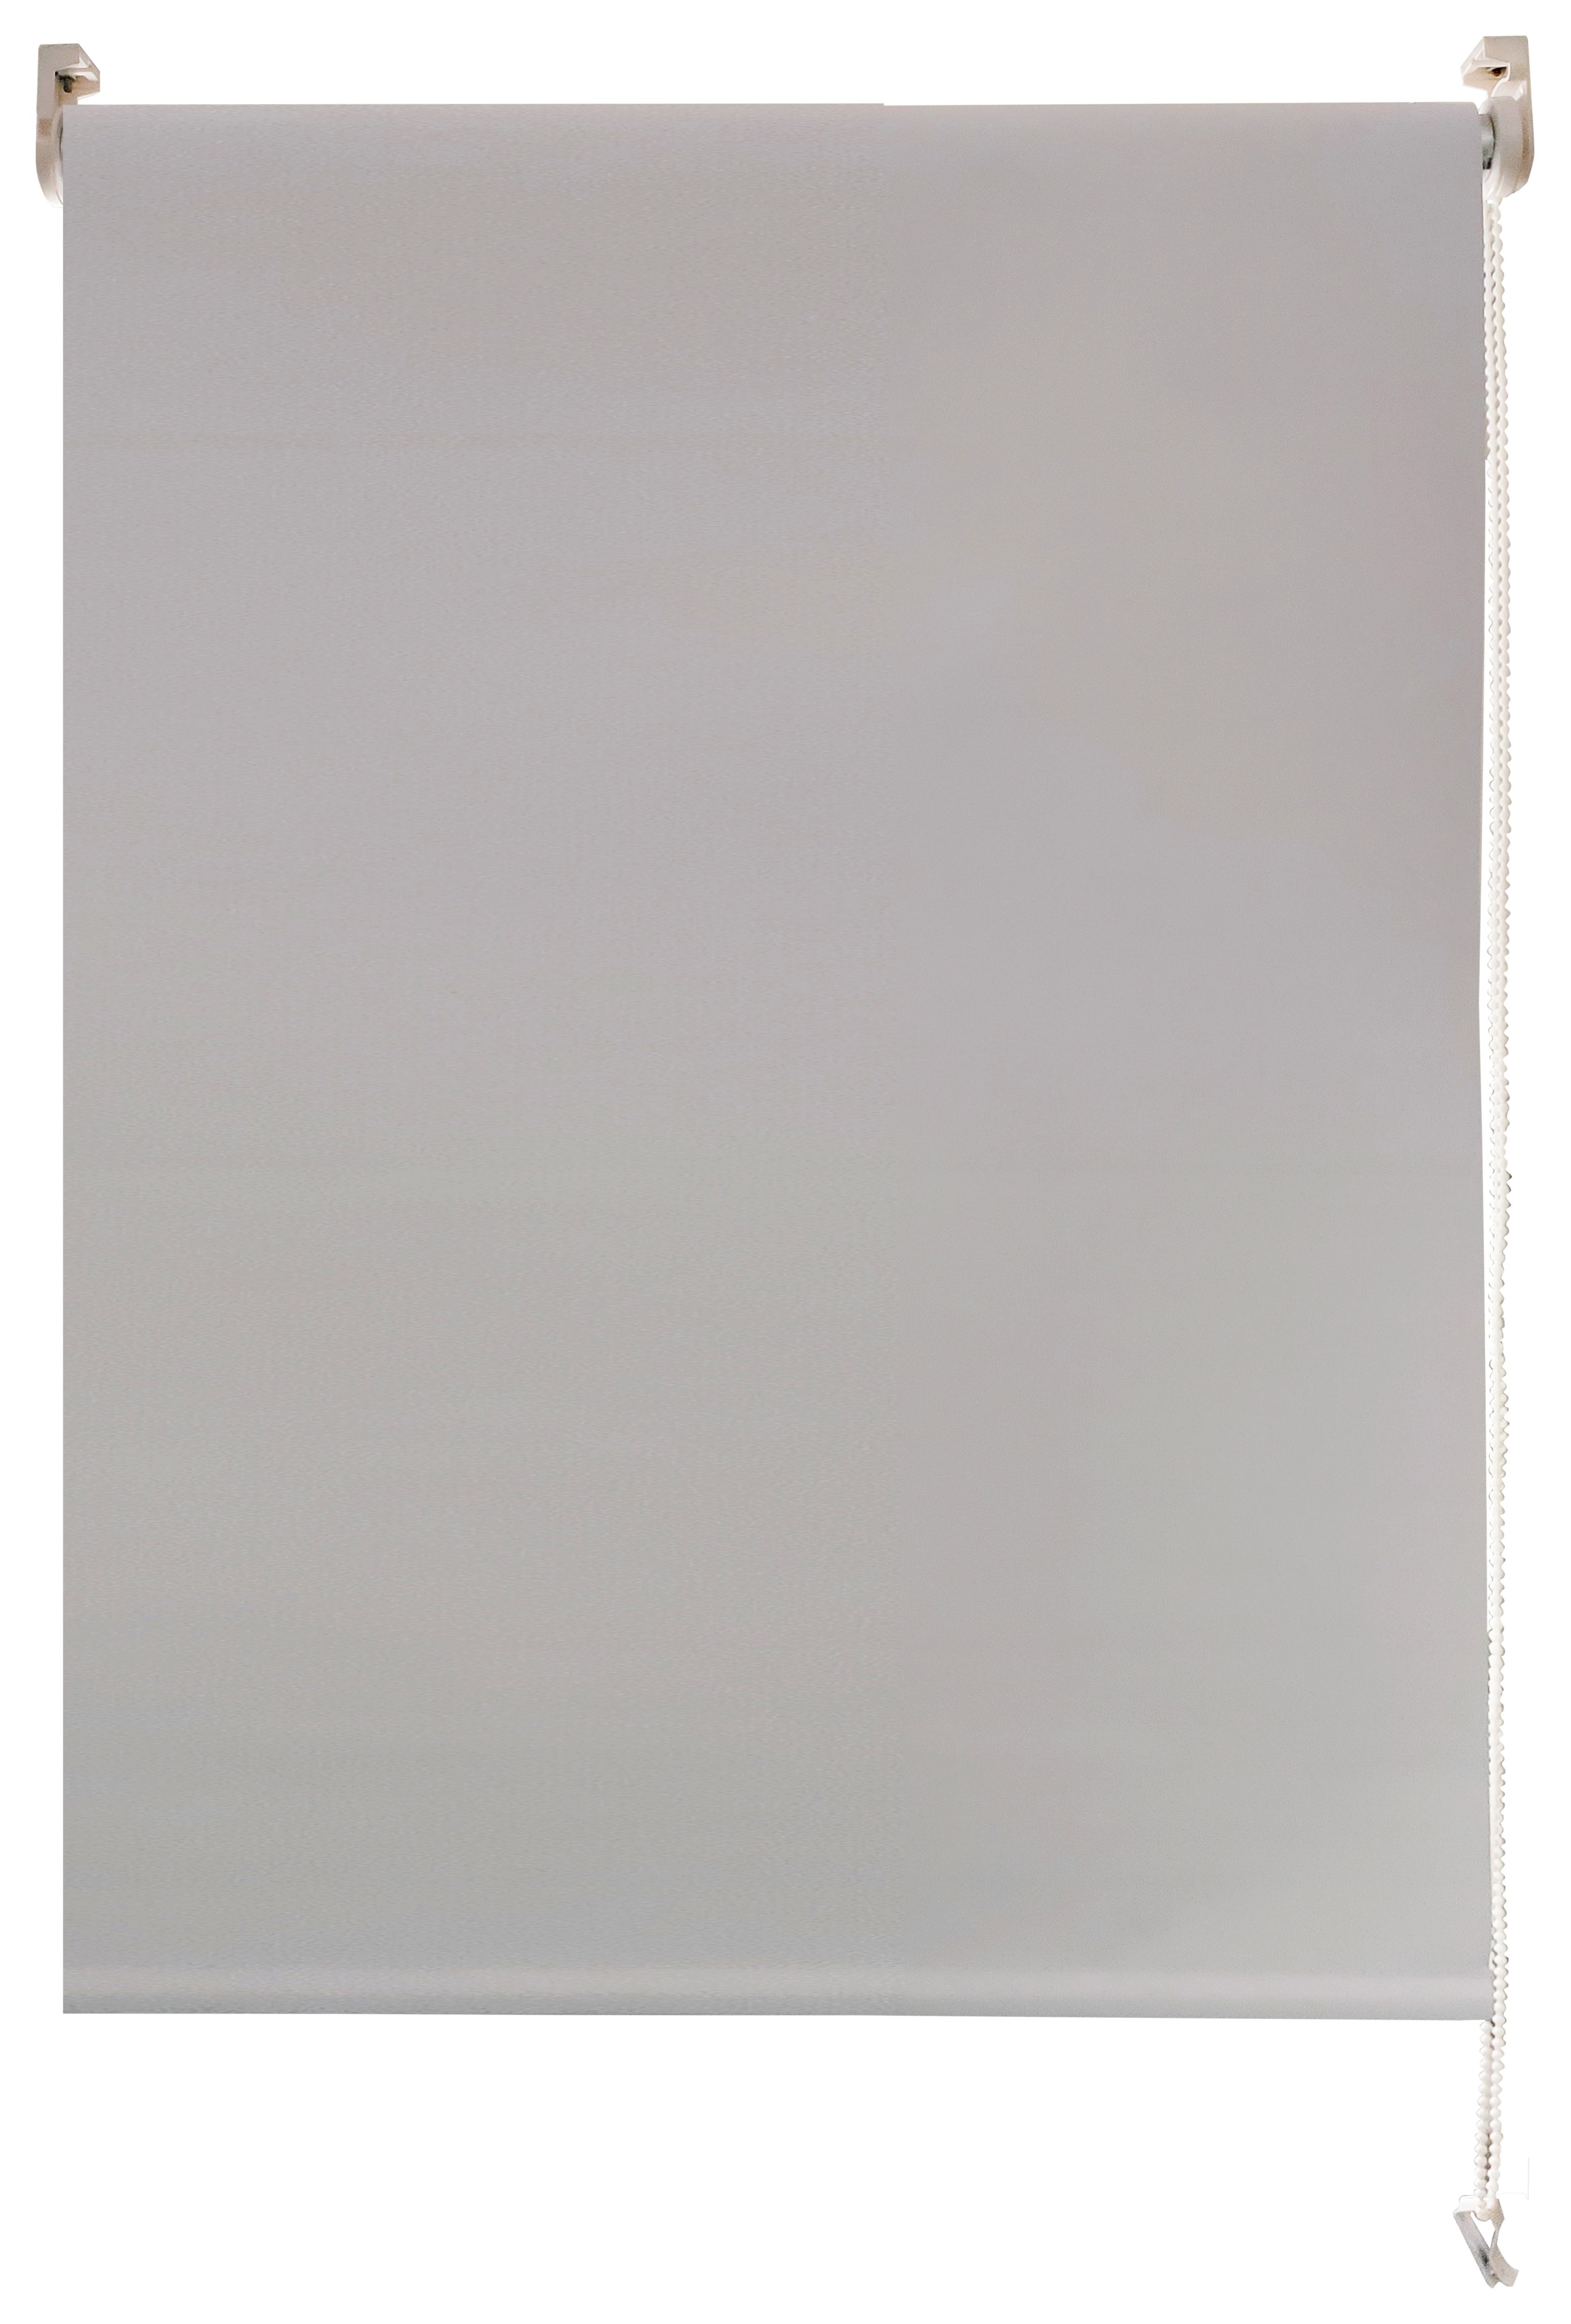 Image of Wickes Blackout Roller Blind Grey 120x170cm